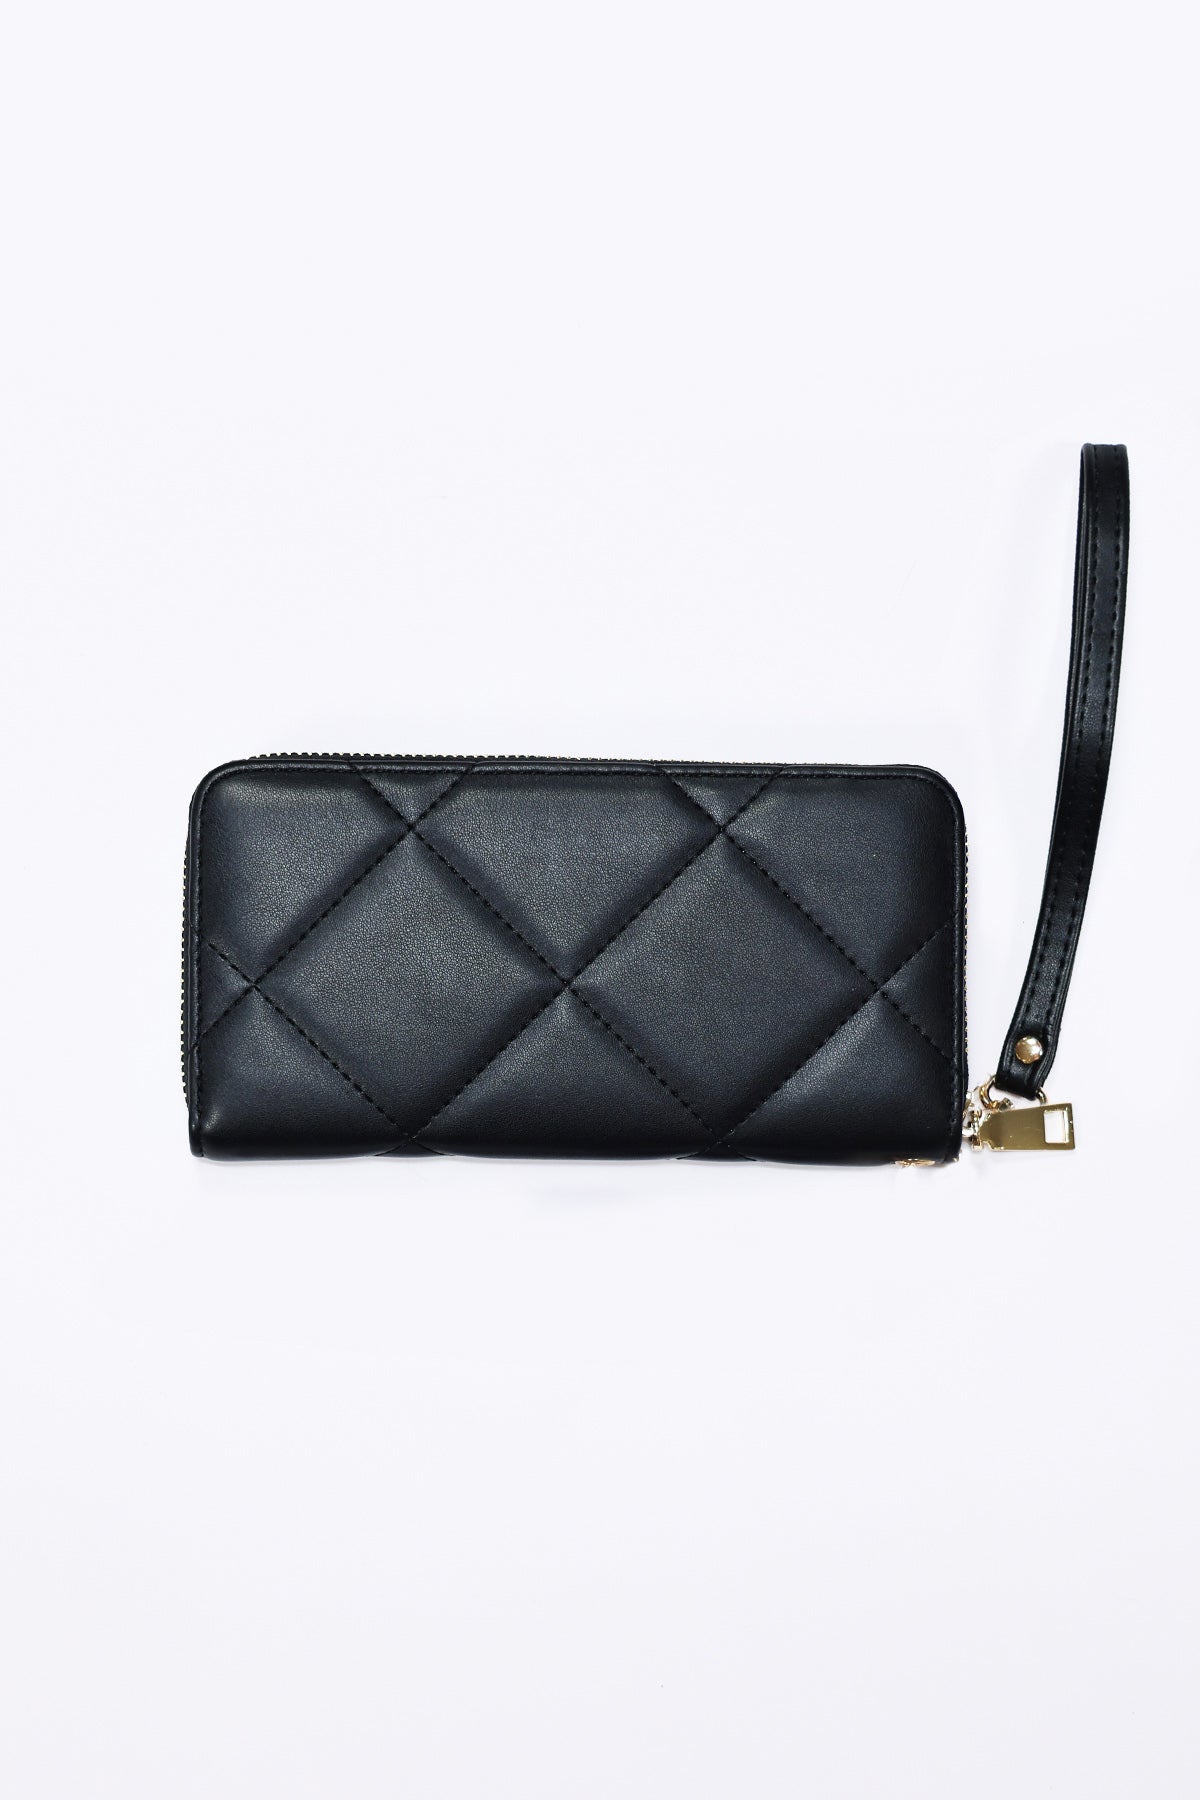 Buy Black Leather Quilted Chain Shoulder Bag from the Next UK online shop